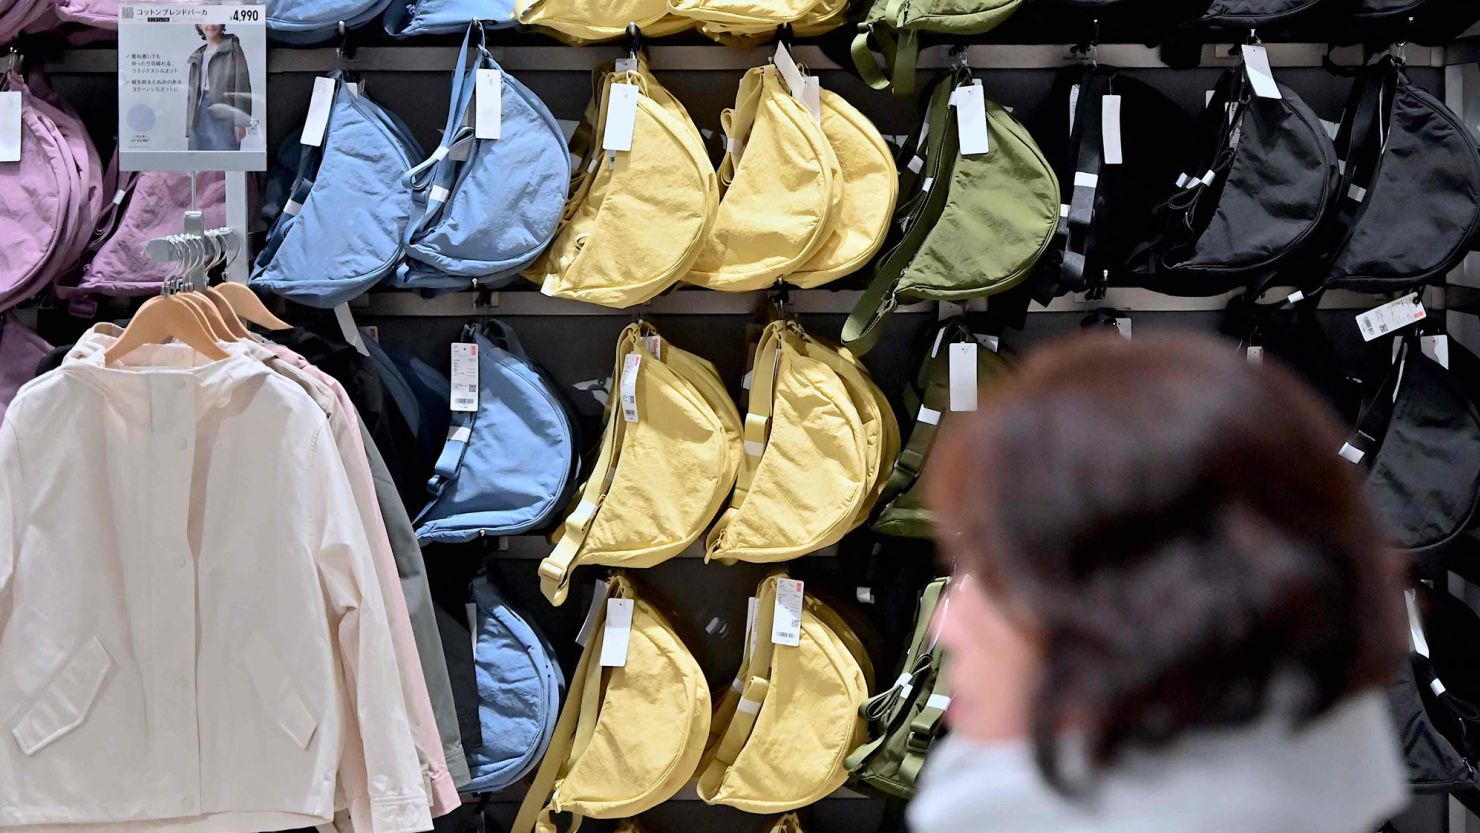 Uniqlo's 9% Price Cuts in Japan Will Not Be Seen Abroad